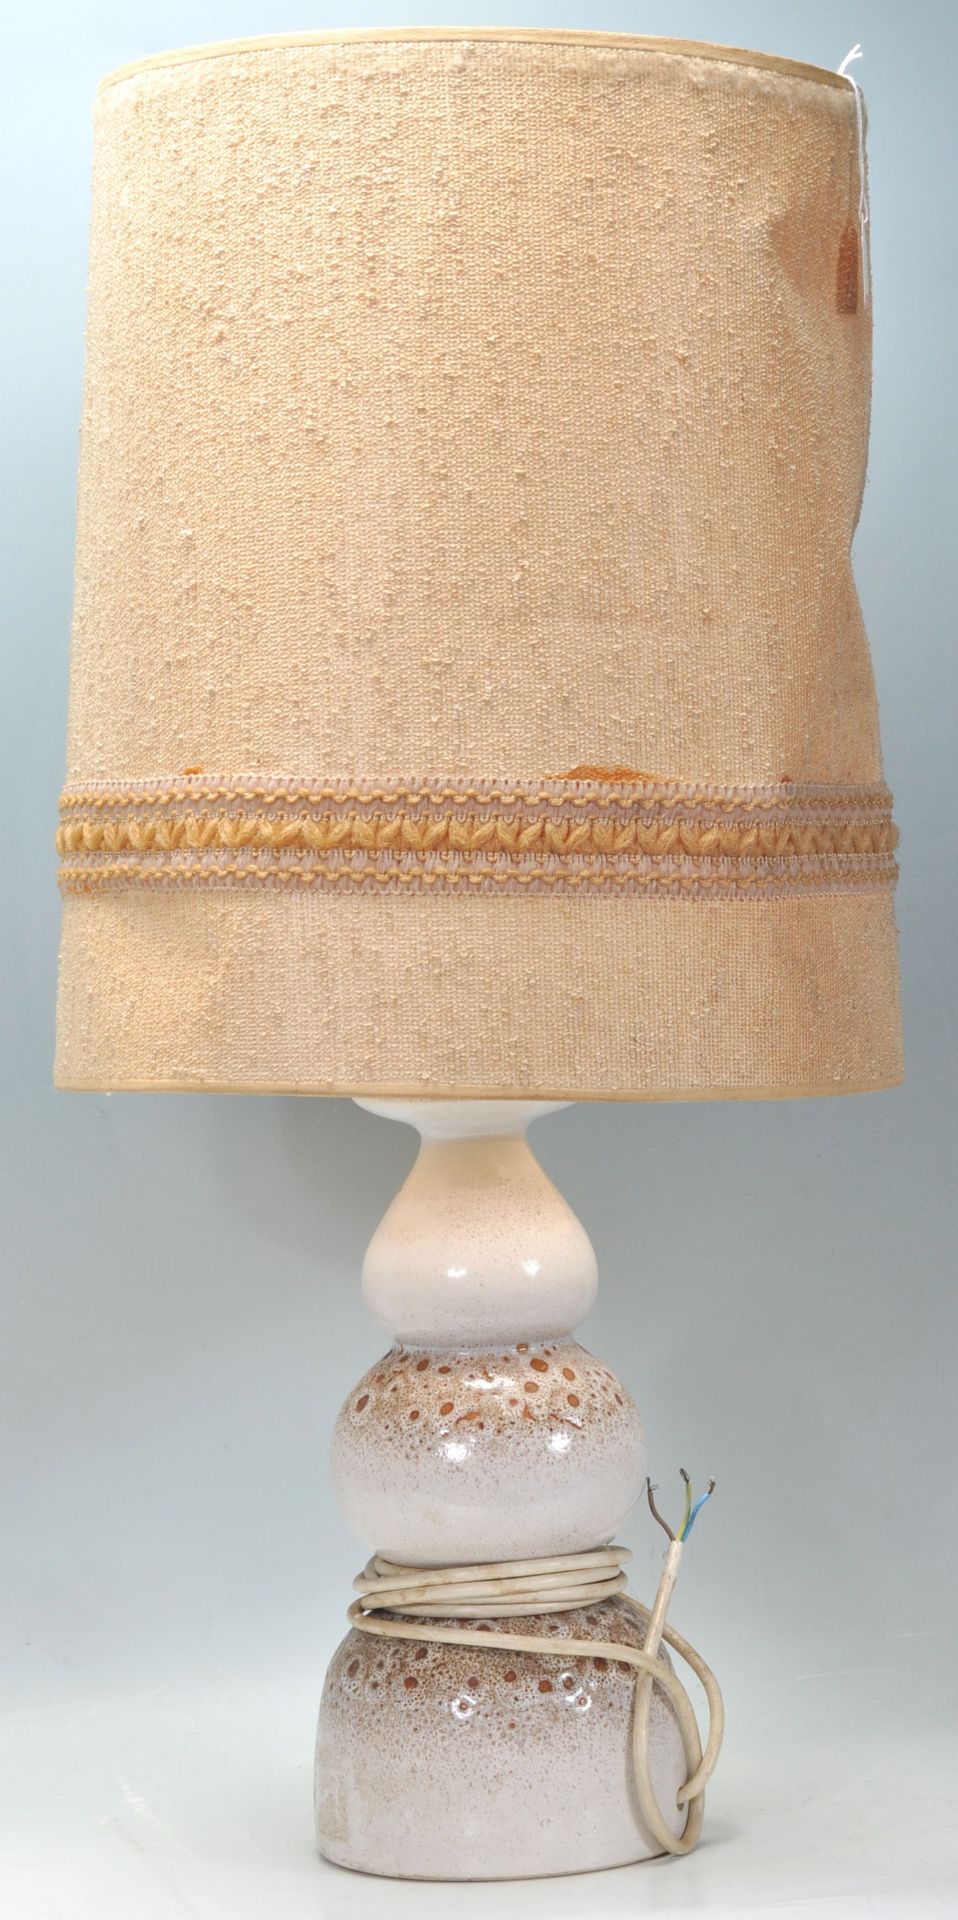 A large retro mid 20th Century glazed West German type ceramic floor - table lamp having a large